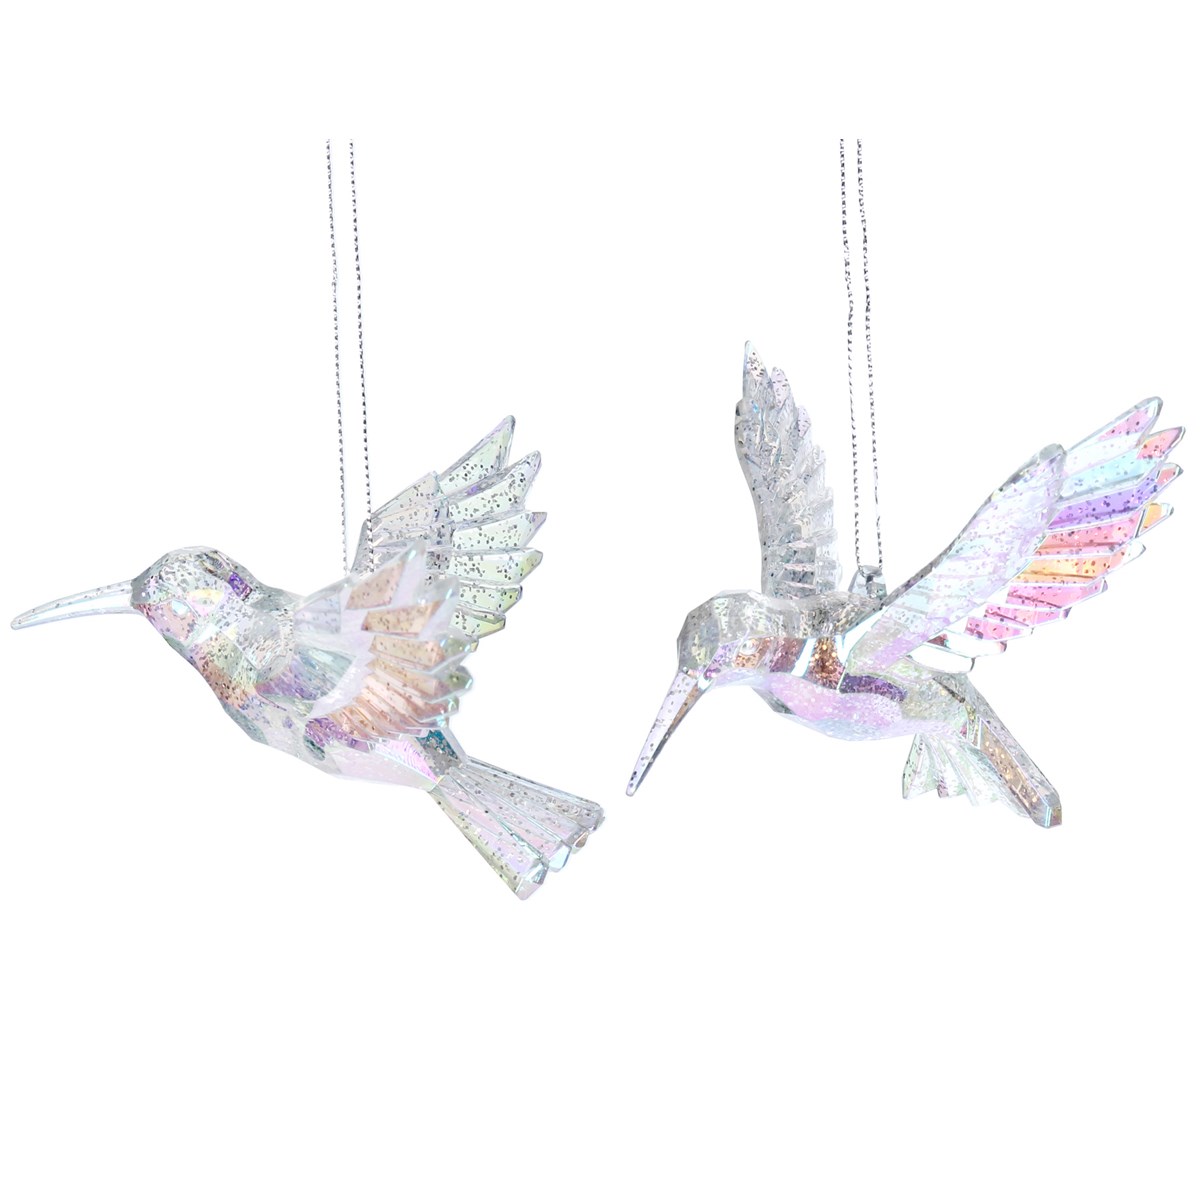 Iridescent Hummingbird hanging Christmas decoration. By Gisela Graham. The perfect festive addition to your home.